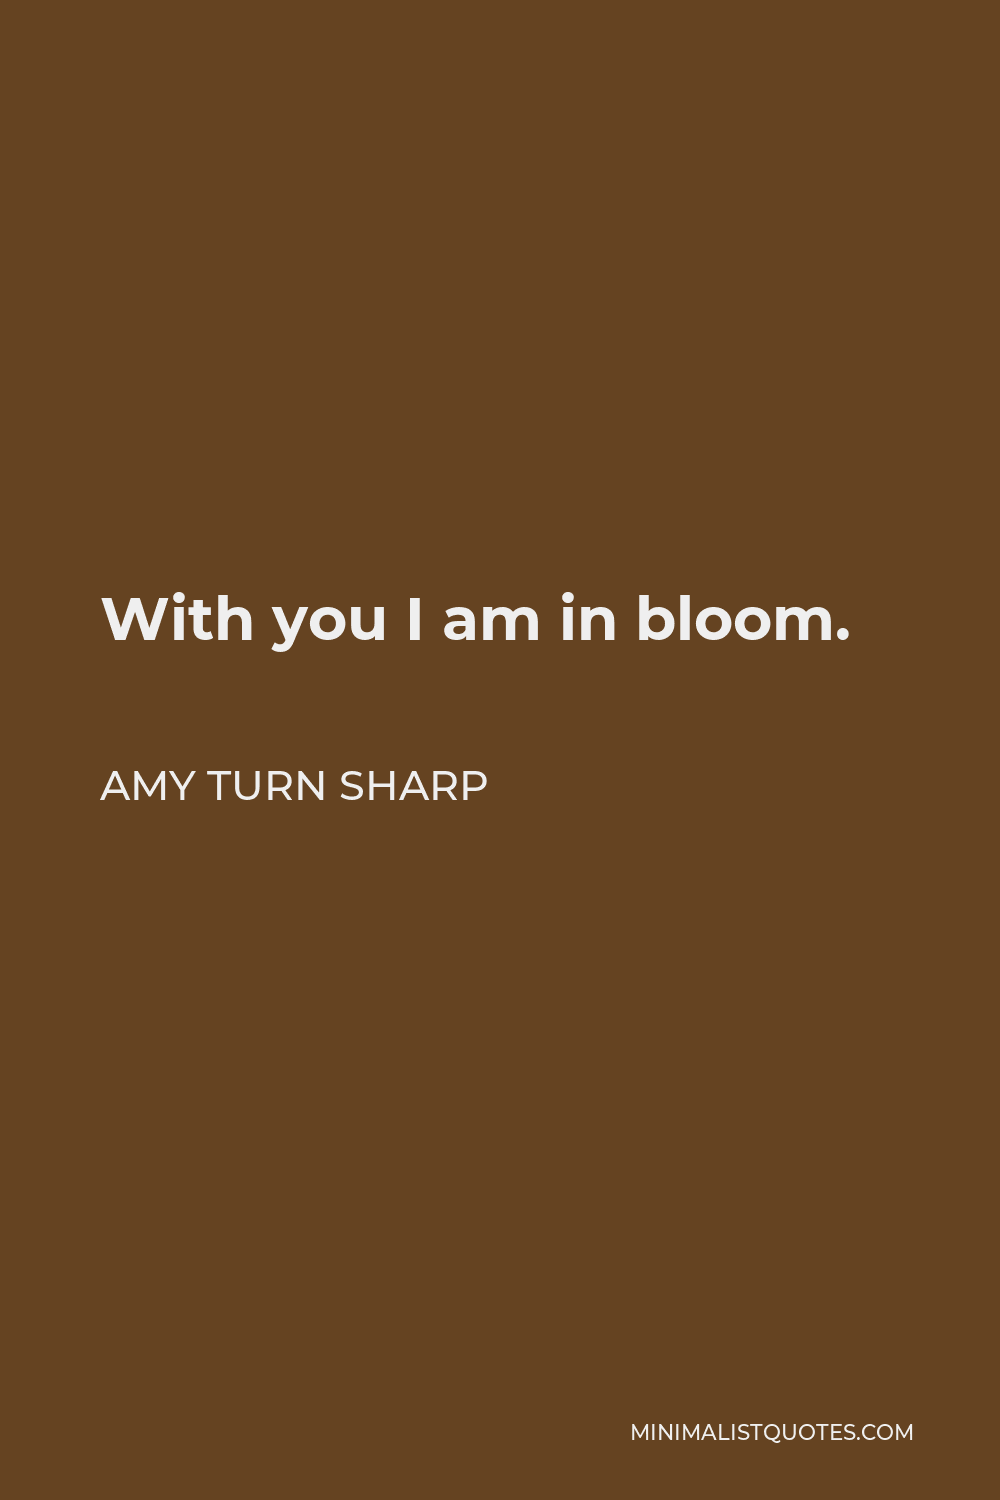 Amy Turn Sharp Quote - With you I am in bloom.